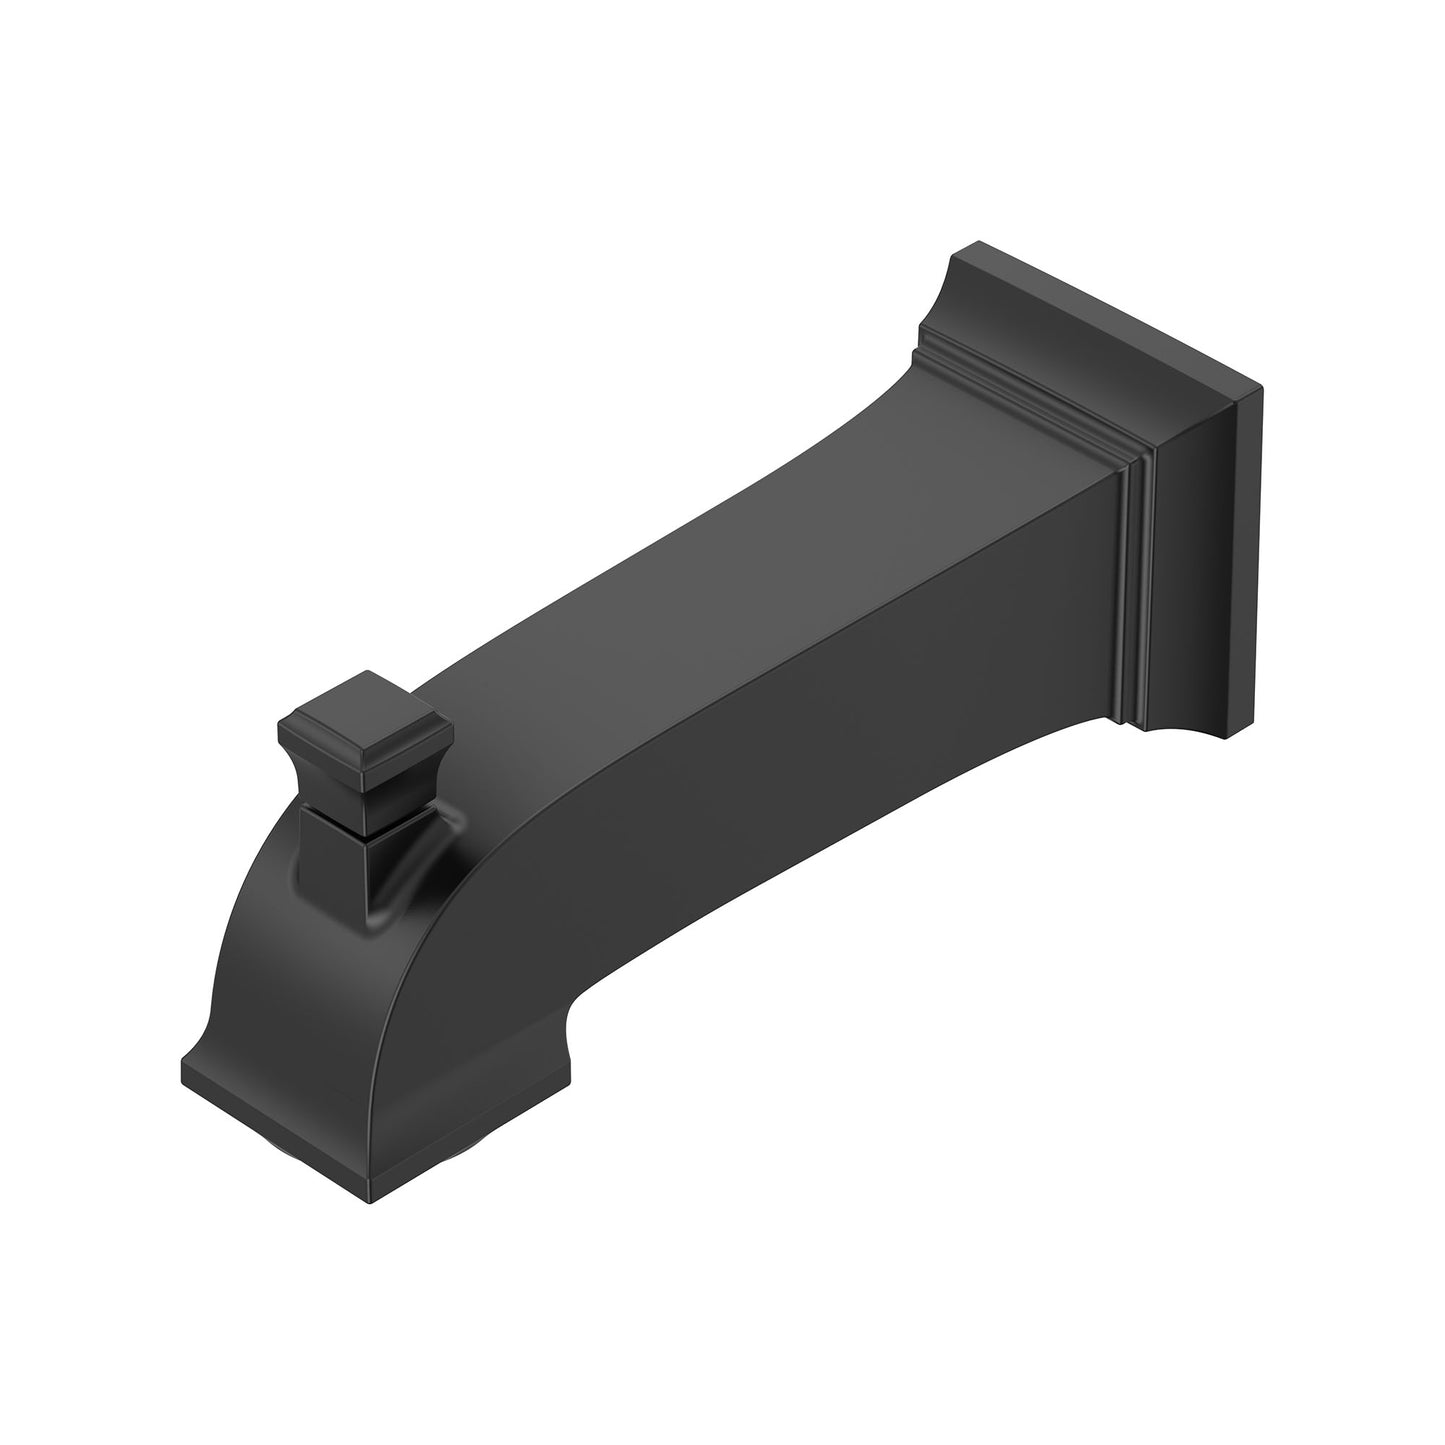 AMERICAN-STANDARD 8888108.243, Town Square S 6-3/4-Inch IPS Diverter Tub Spout in Matte Black